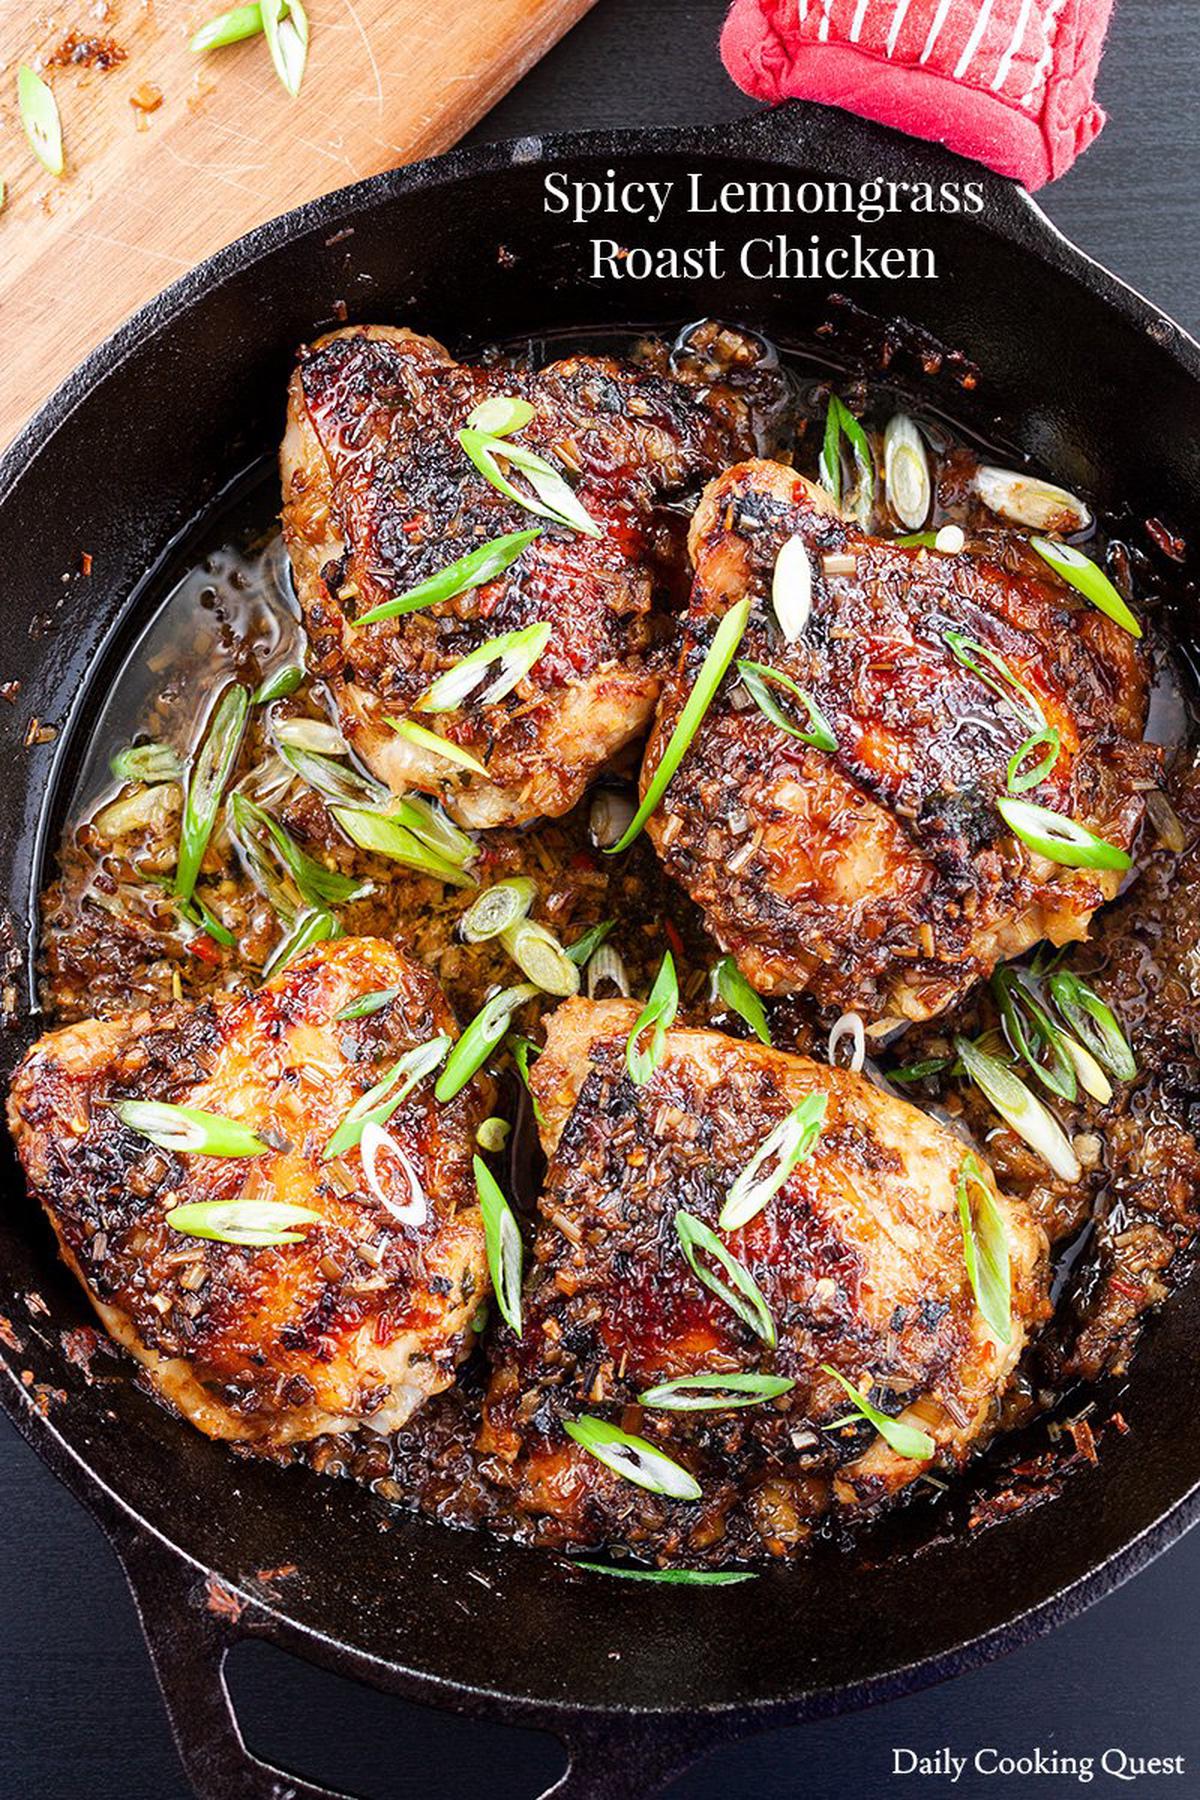 Spicy Lemongrass Roast Chicken | Daily Cooking Quest